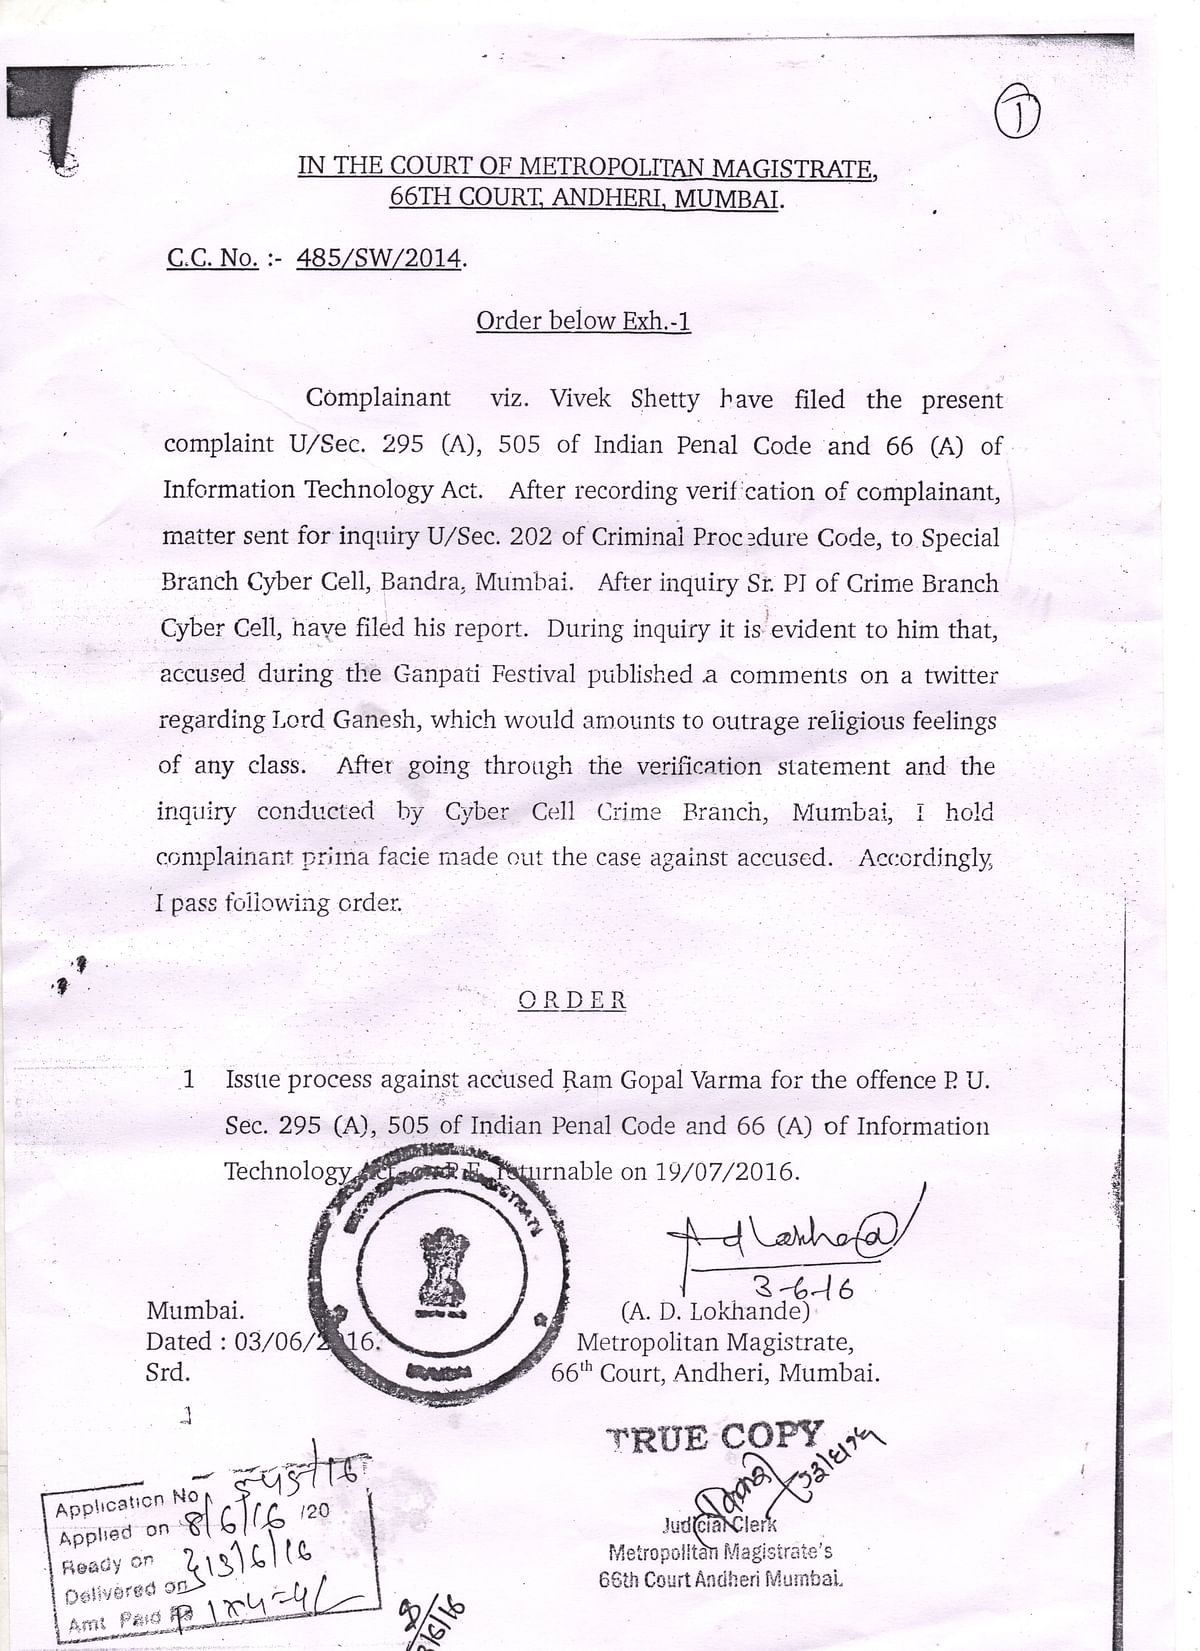 

A court in Andheri issued the summons on the complaint of Vivek Shetty.